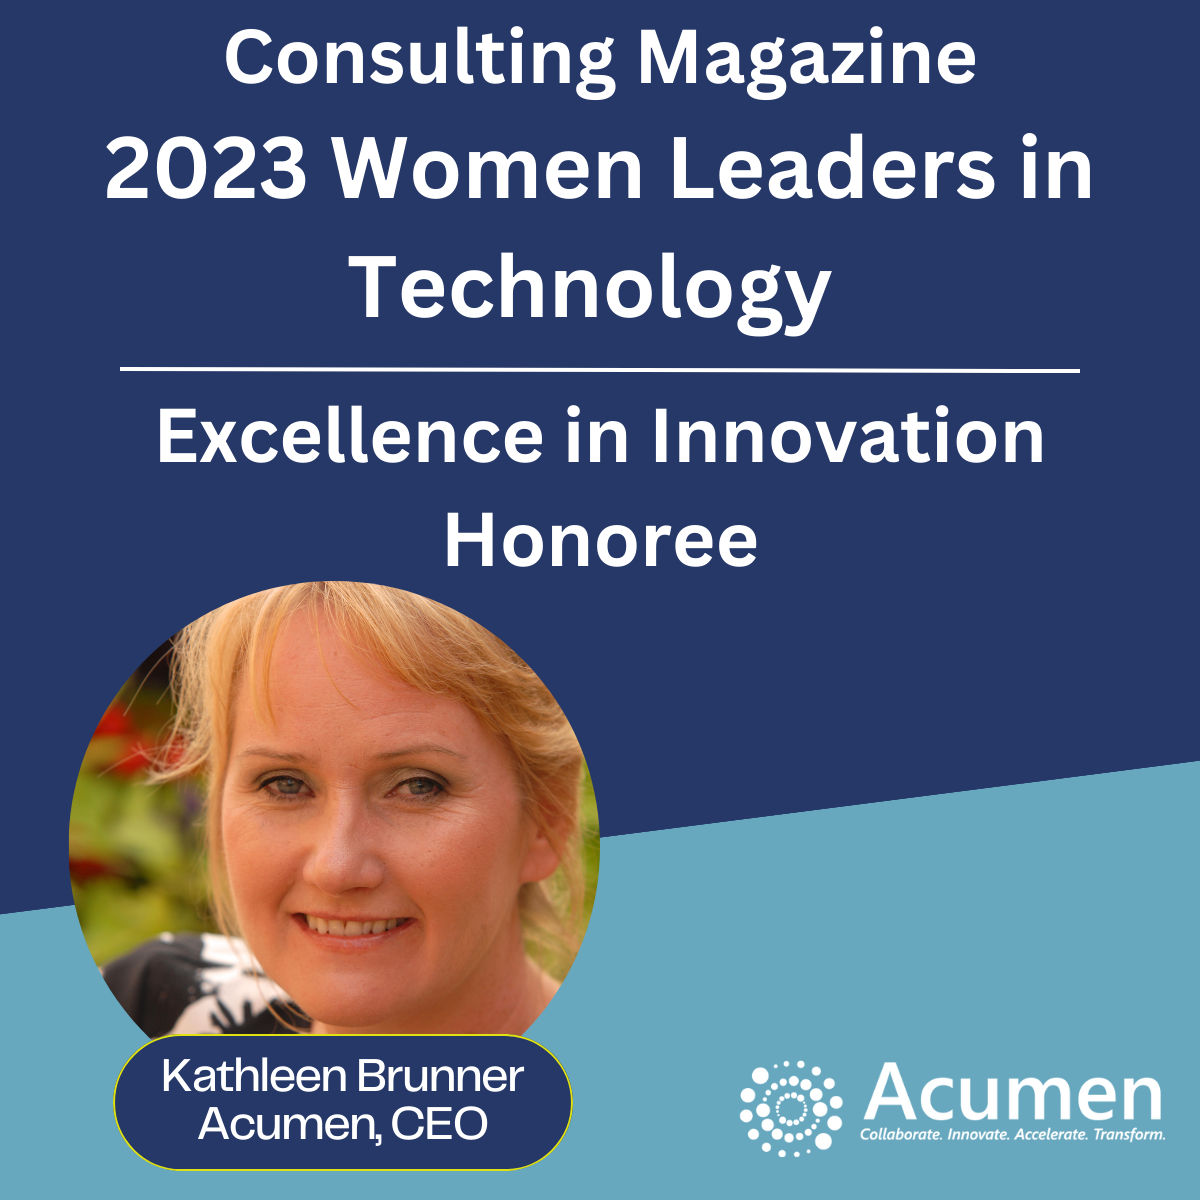 Consulting Magazine - Excellence in Innovation